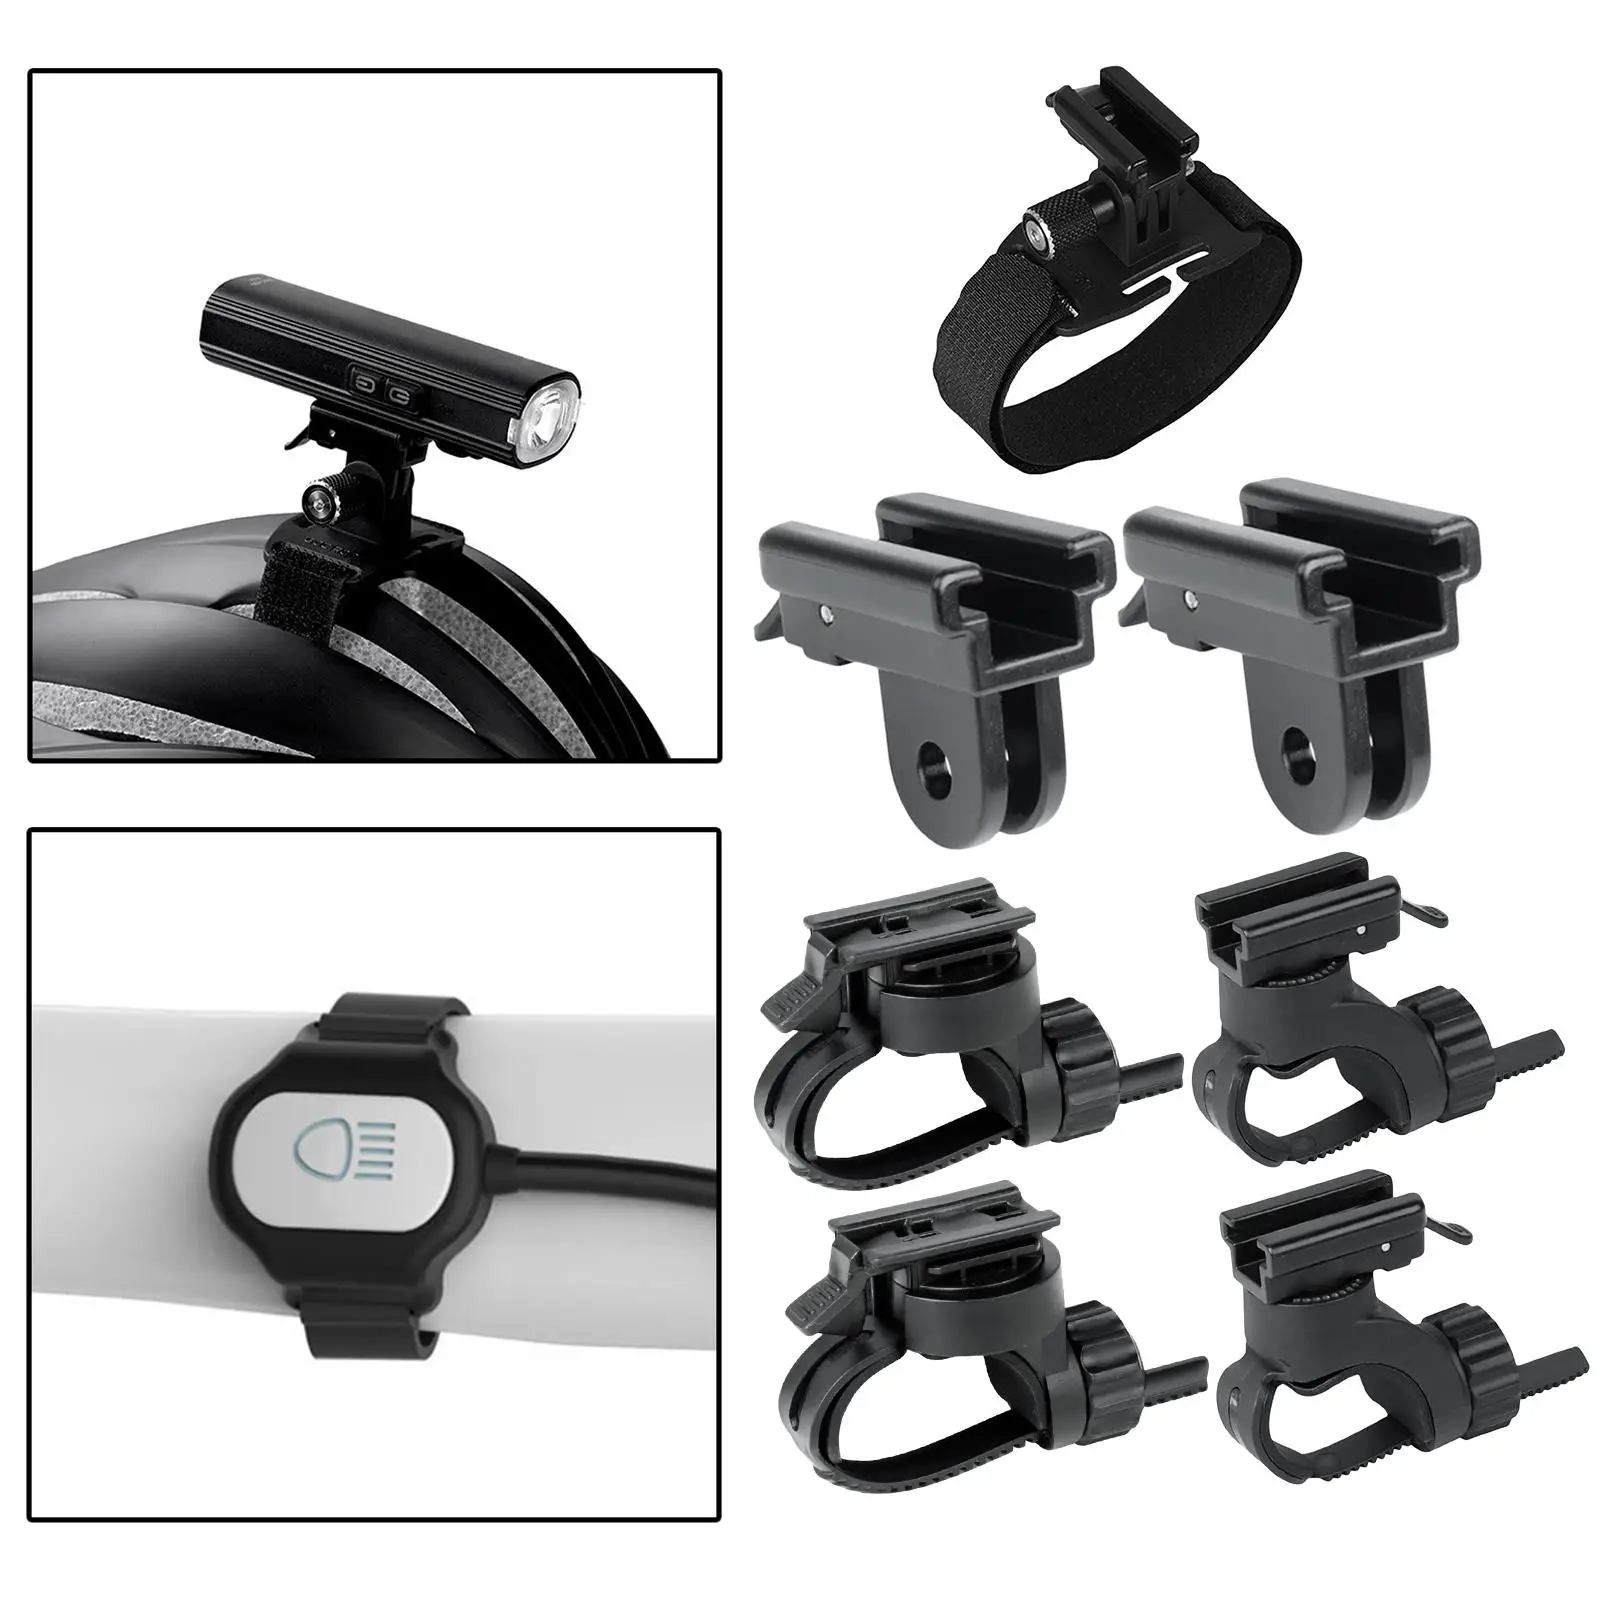 Bike Front Lamp Clip Clamp Headlight Holder Mounting Adjustable Flashlight Mount Stand for 7-43mm Handlebar Extension Universal